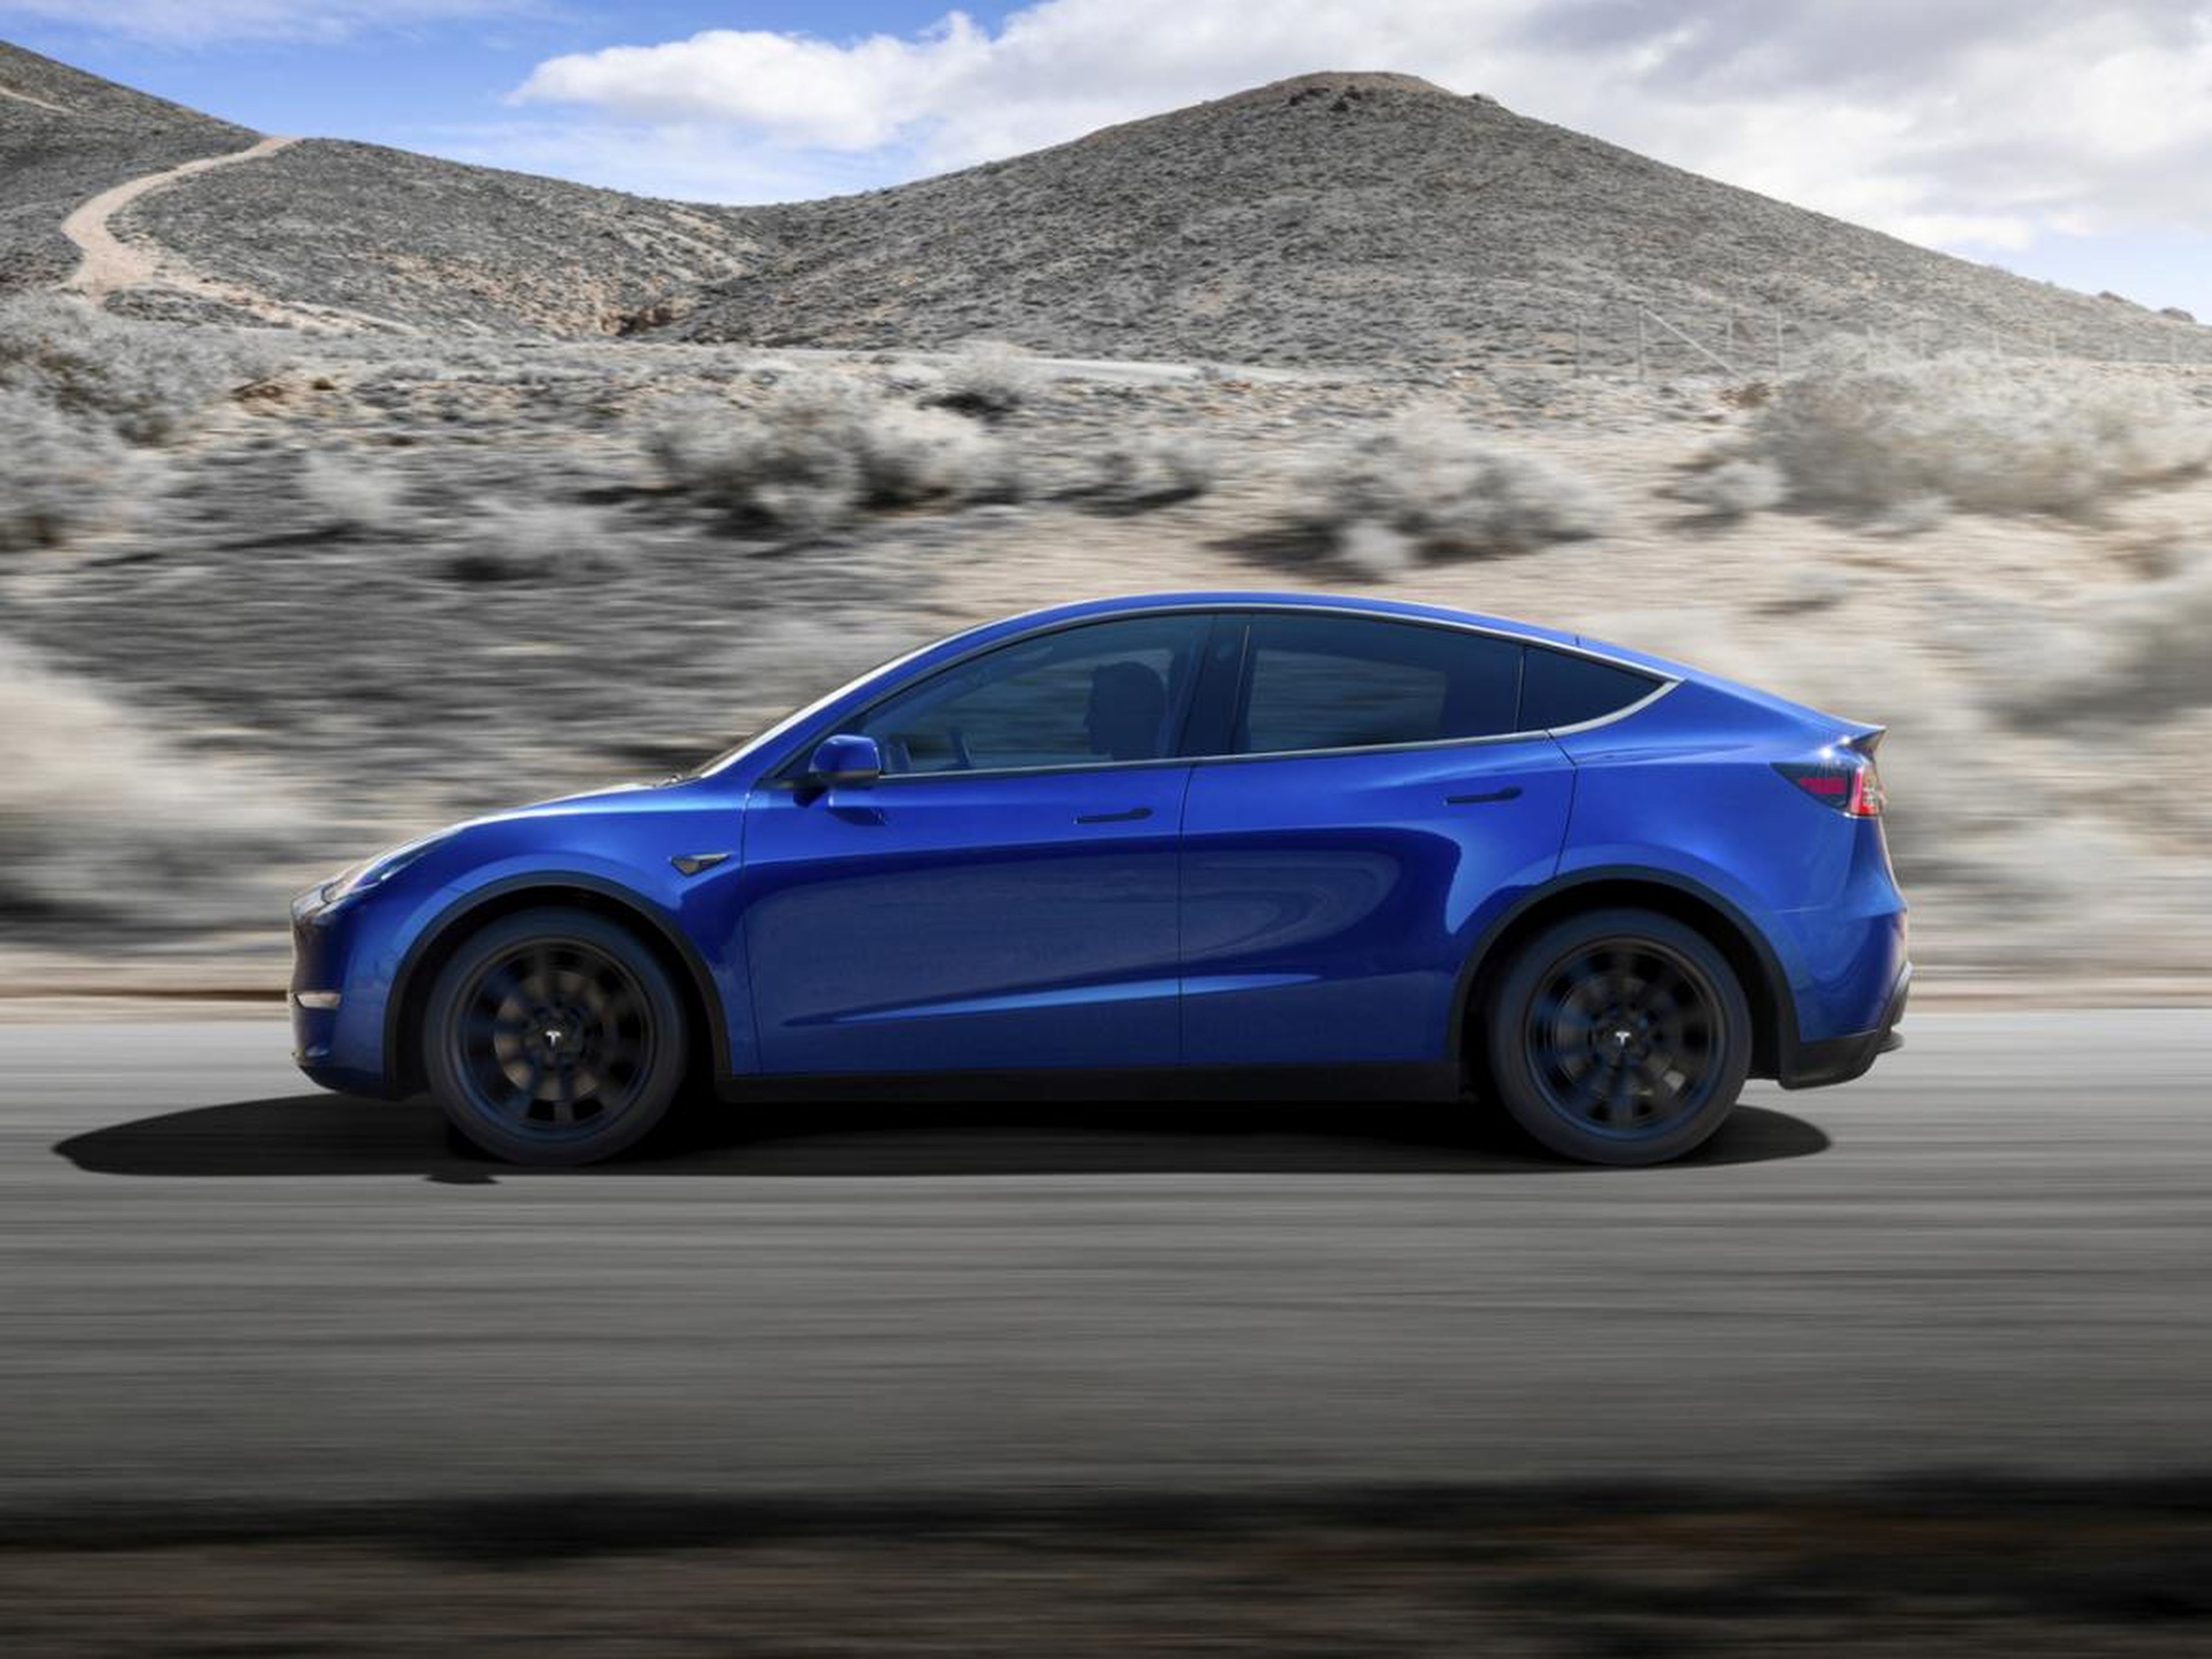 Tesla says production for the Model Y will begin in 2020.